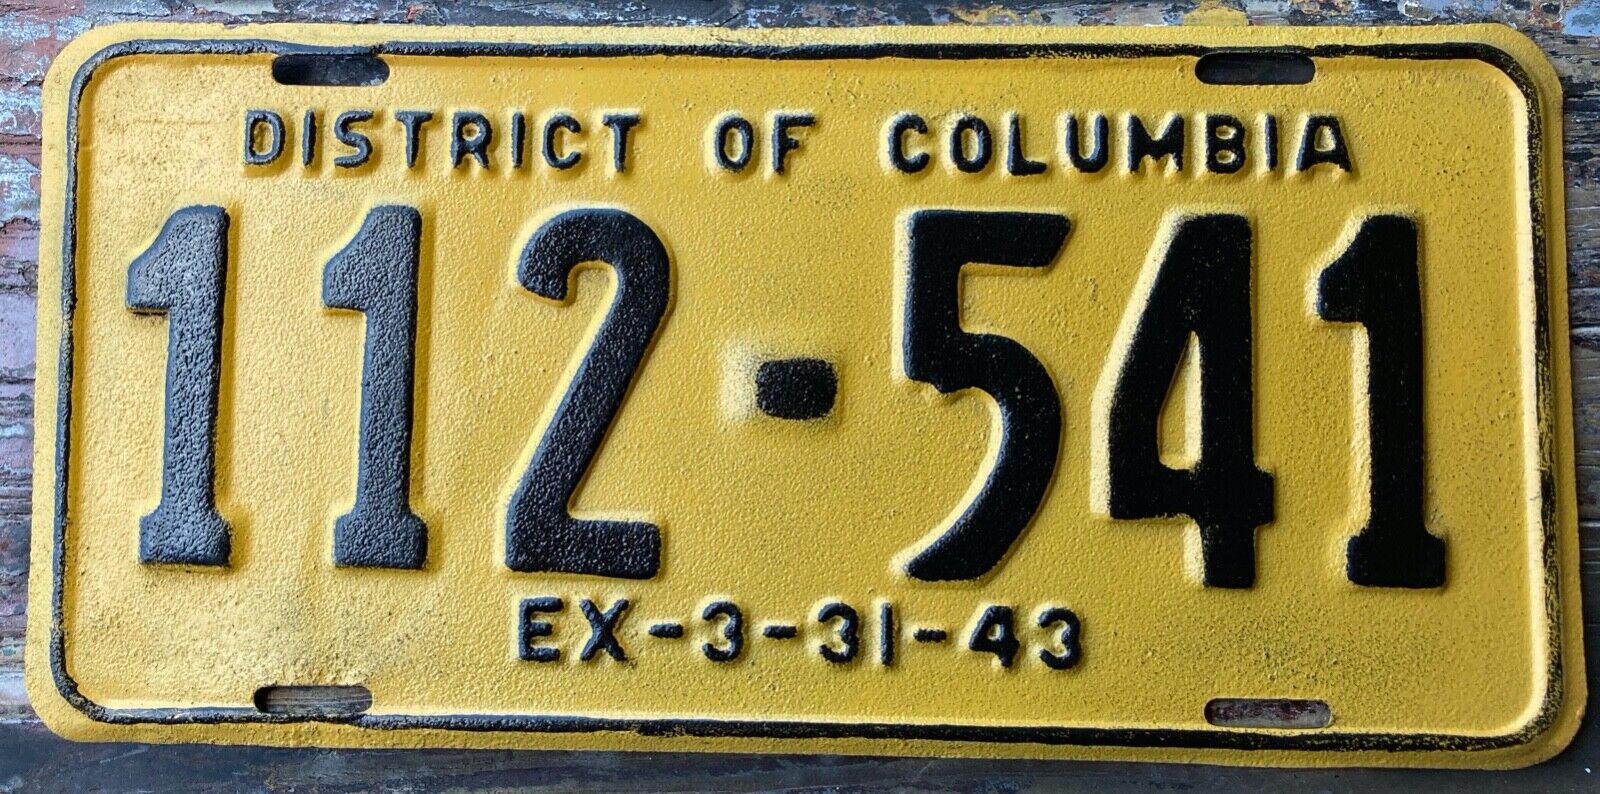 DECENT, REPAINTED 1943 Washington DC, District of Columbia LICENSE PLATE 112 541